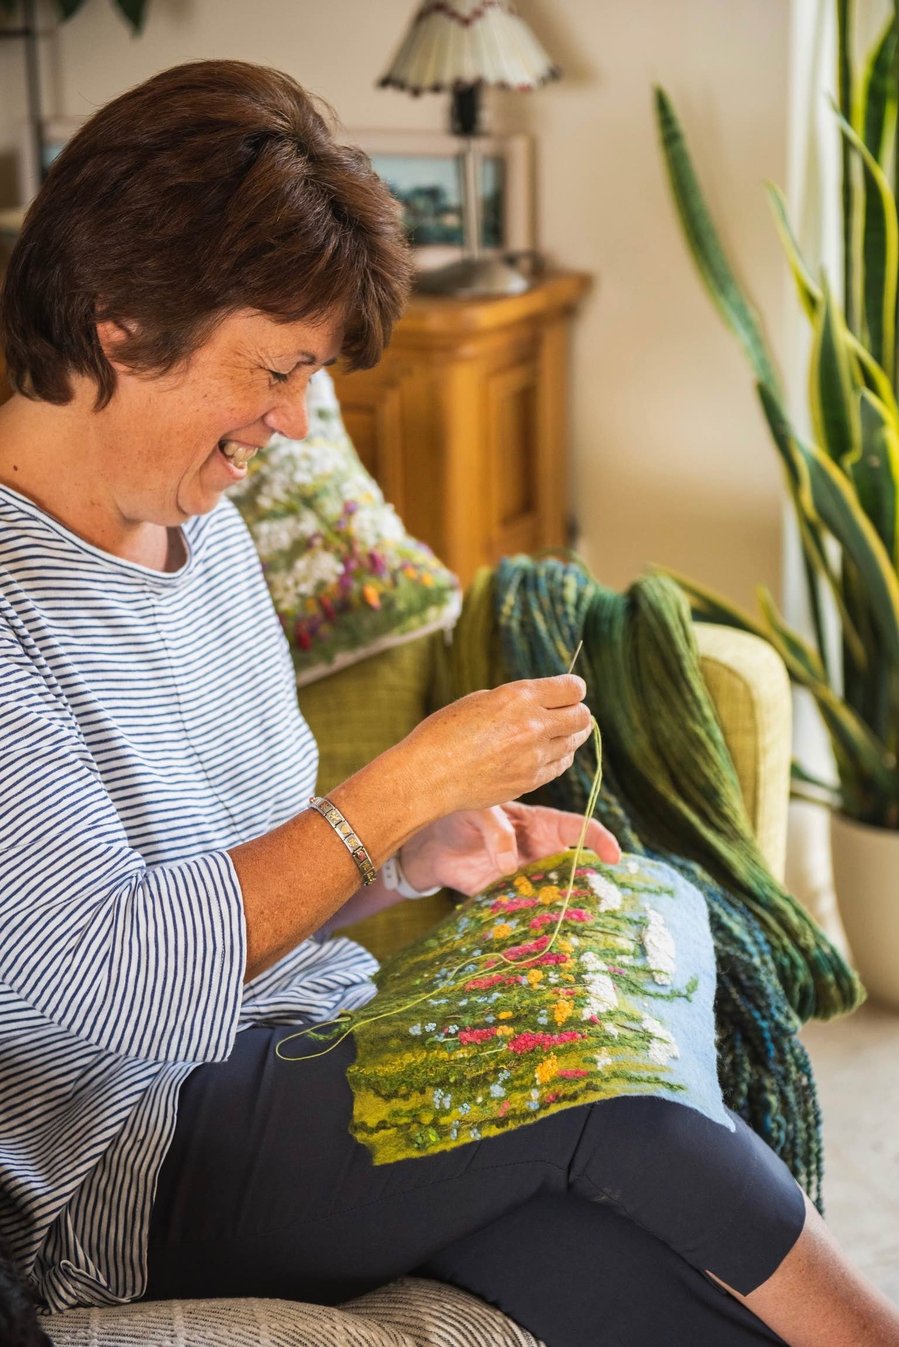 Learn how to wet felt with Lynn Comley. A workshop at Scampston hall. Learn how to felt a landscape with embroidery with felt artist Up and Down Dale